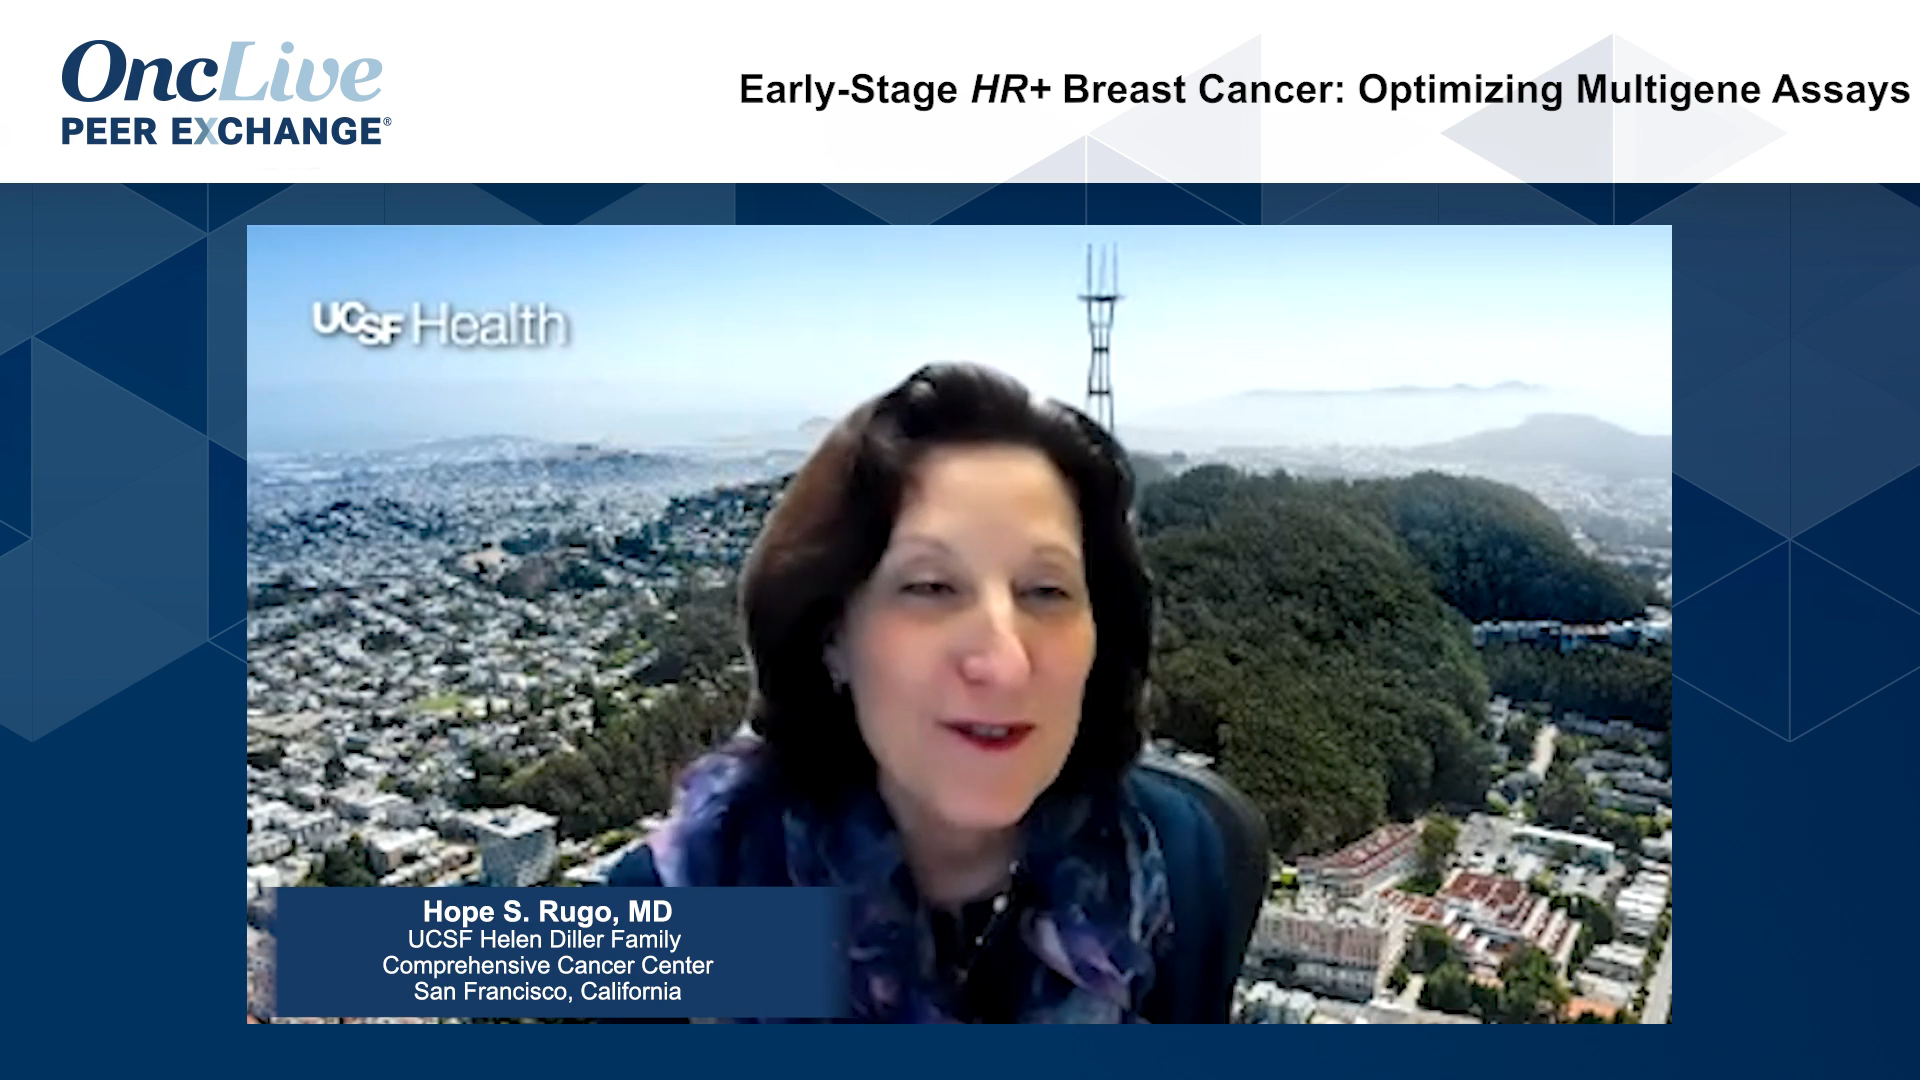 Early Stage HR+ Breast Cancer: Optimizing Multigene Assays